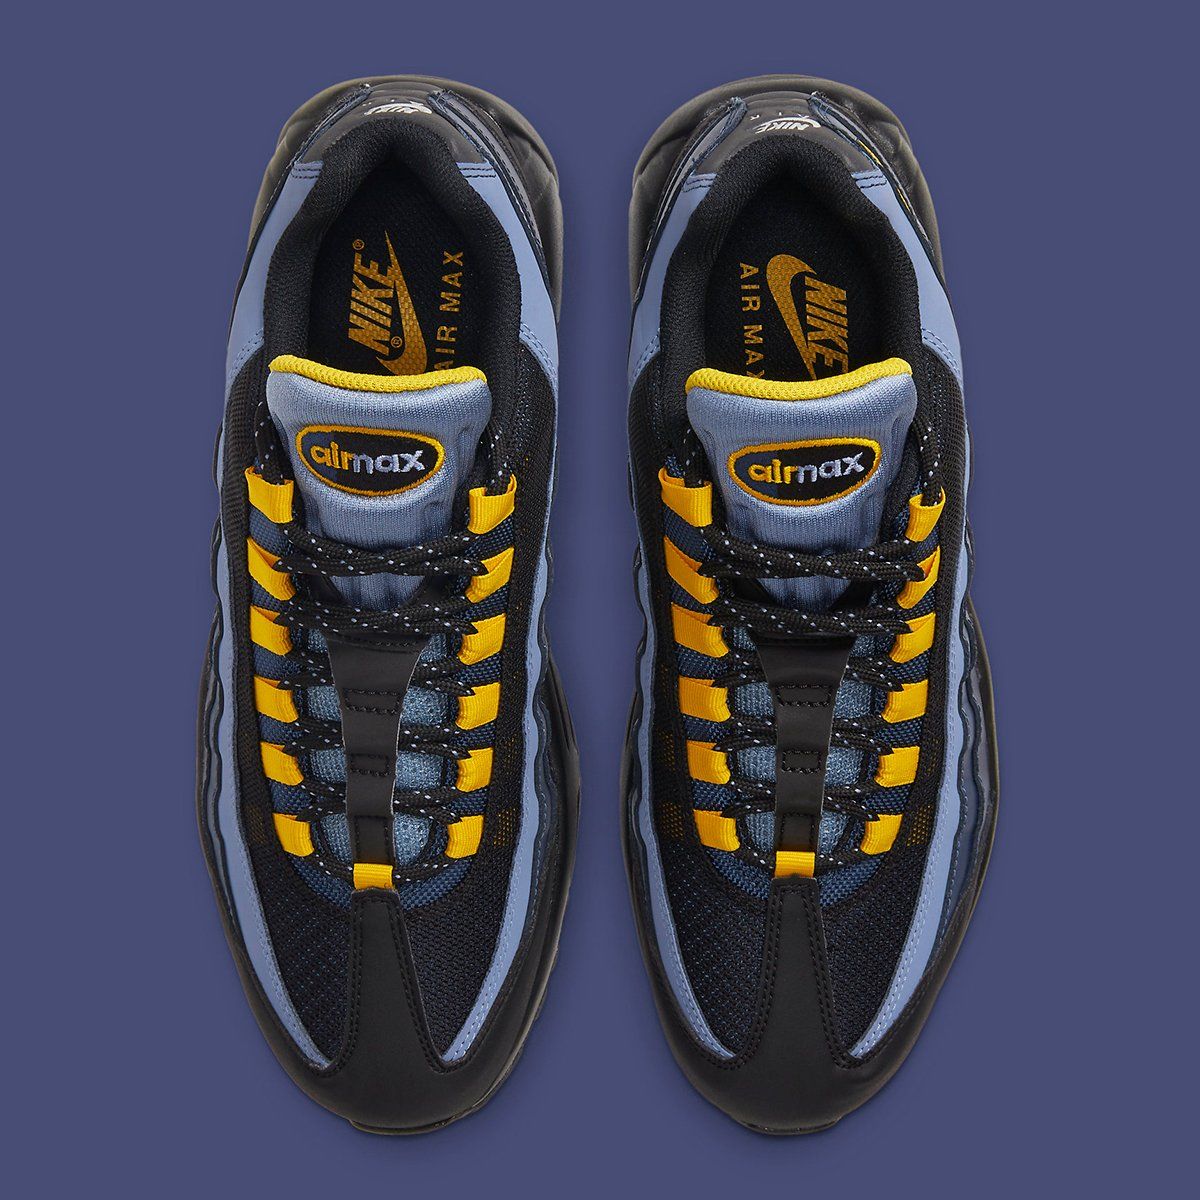 nike air max 95 blue and yellow